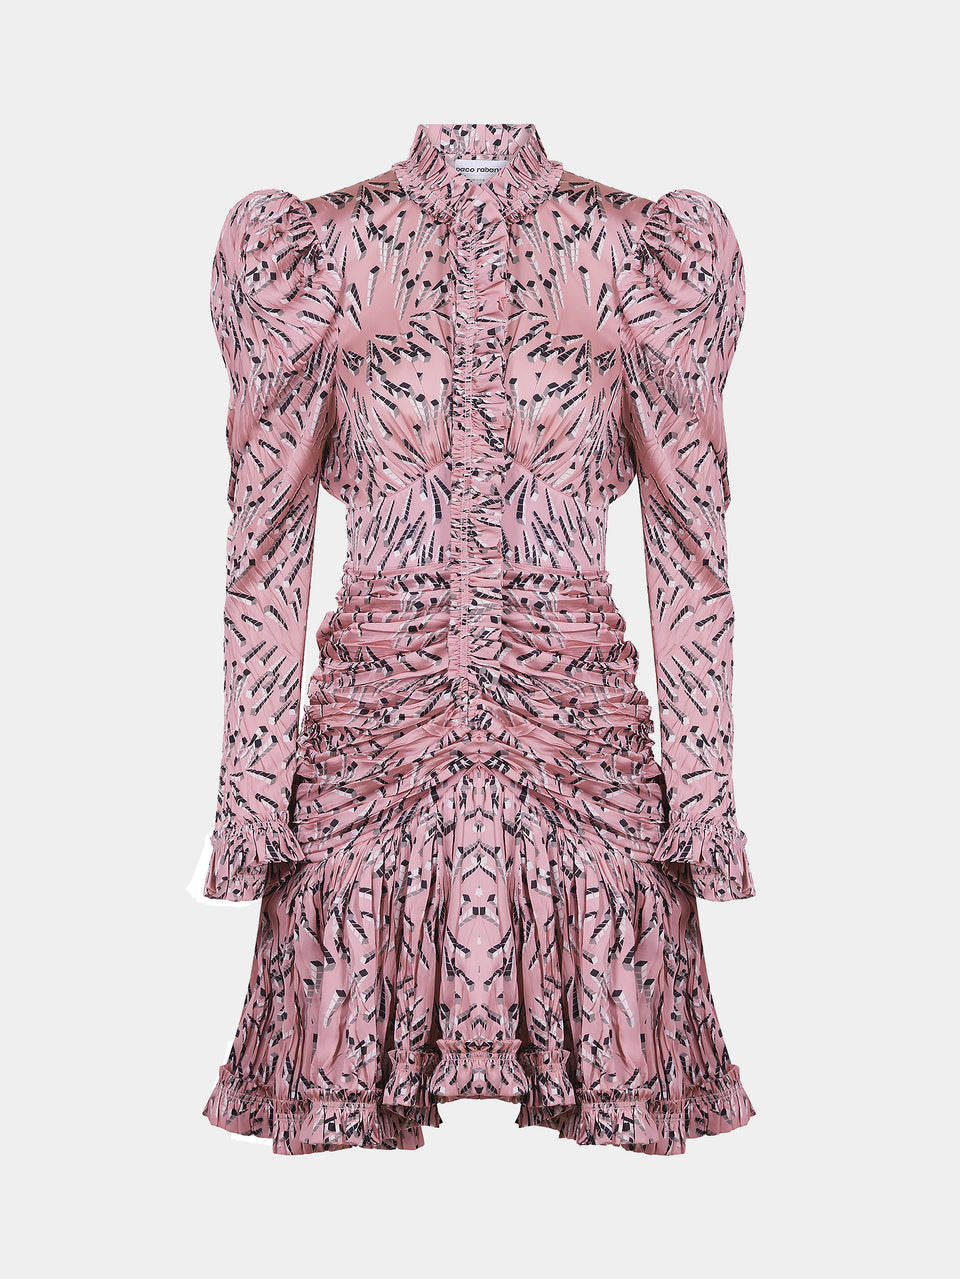 Pleated Pink Dress with Patterns